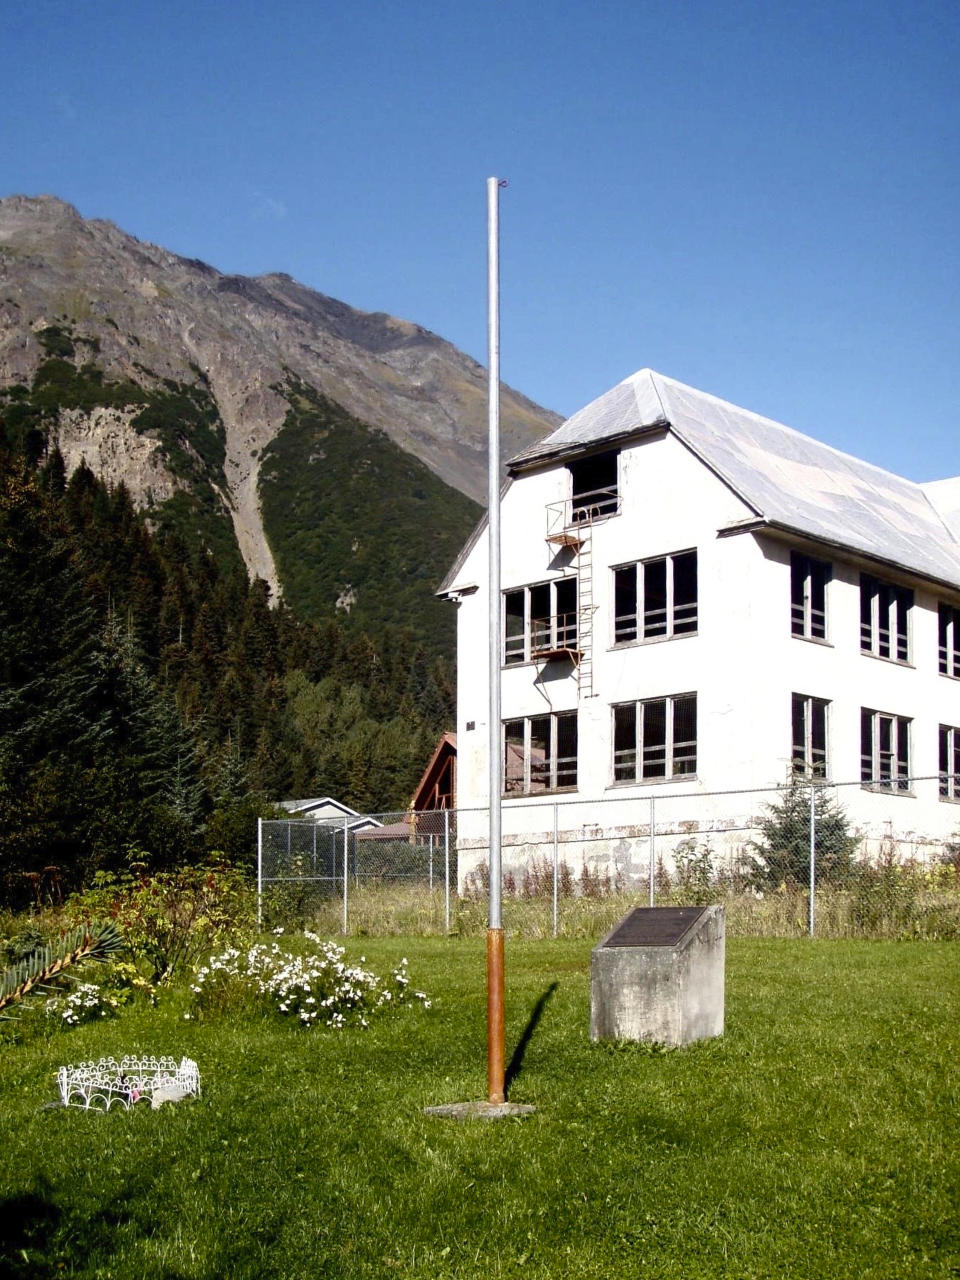 This undated photo shows a building that remains at the site of the Jesse Lee Home in Seward, Alaska, where the territorial flag, which later became the Alaska state flag, was first flown. The Seward City Council will decide Monday, July 13, 2020, whether to demolish the remaining buildings. (Dorene Lorenz via AP)